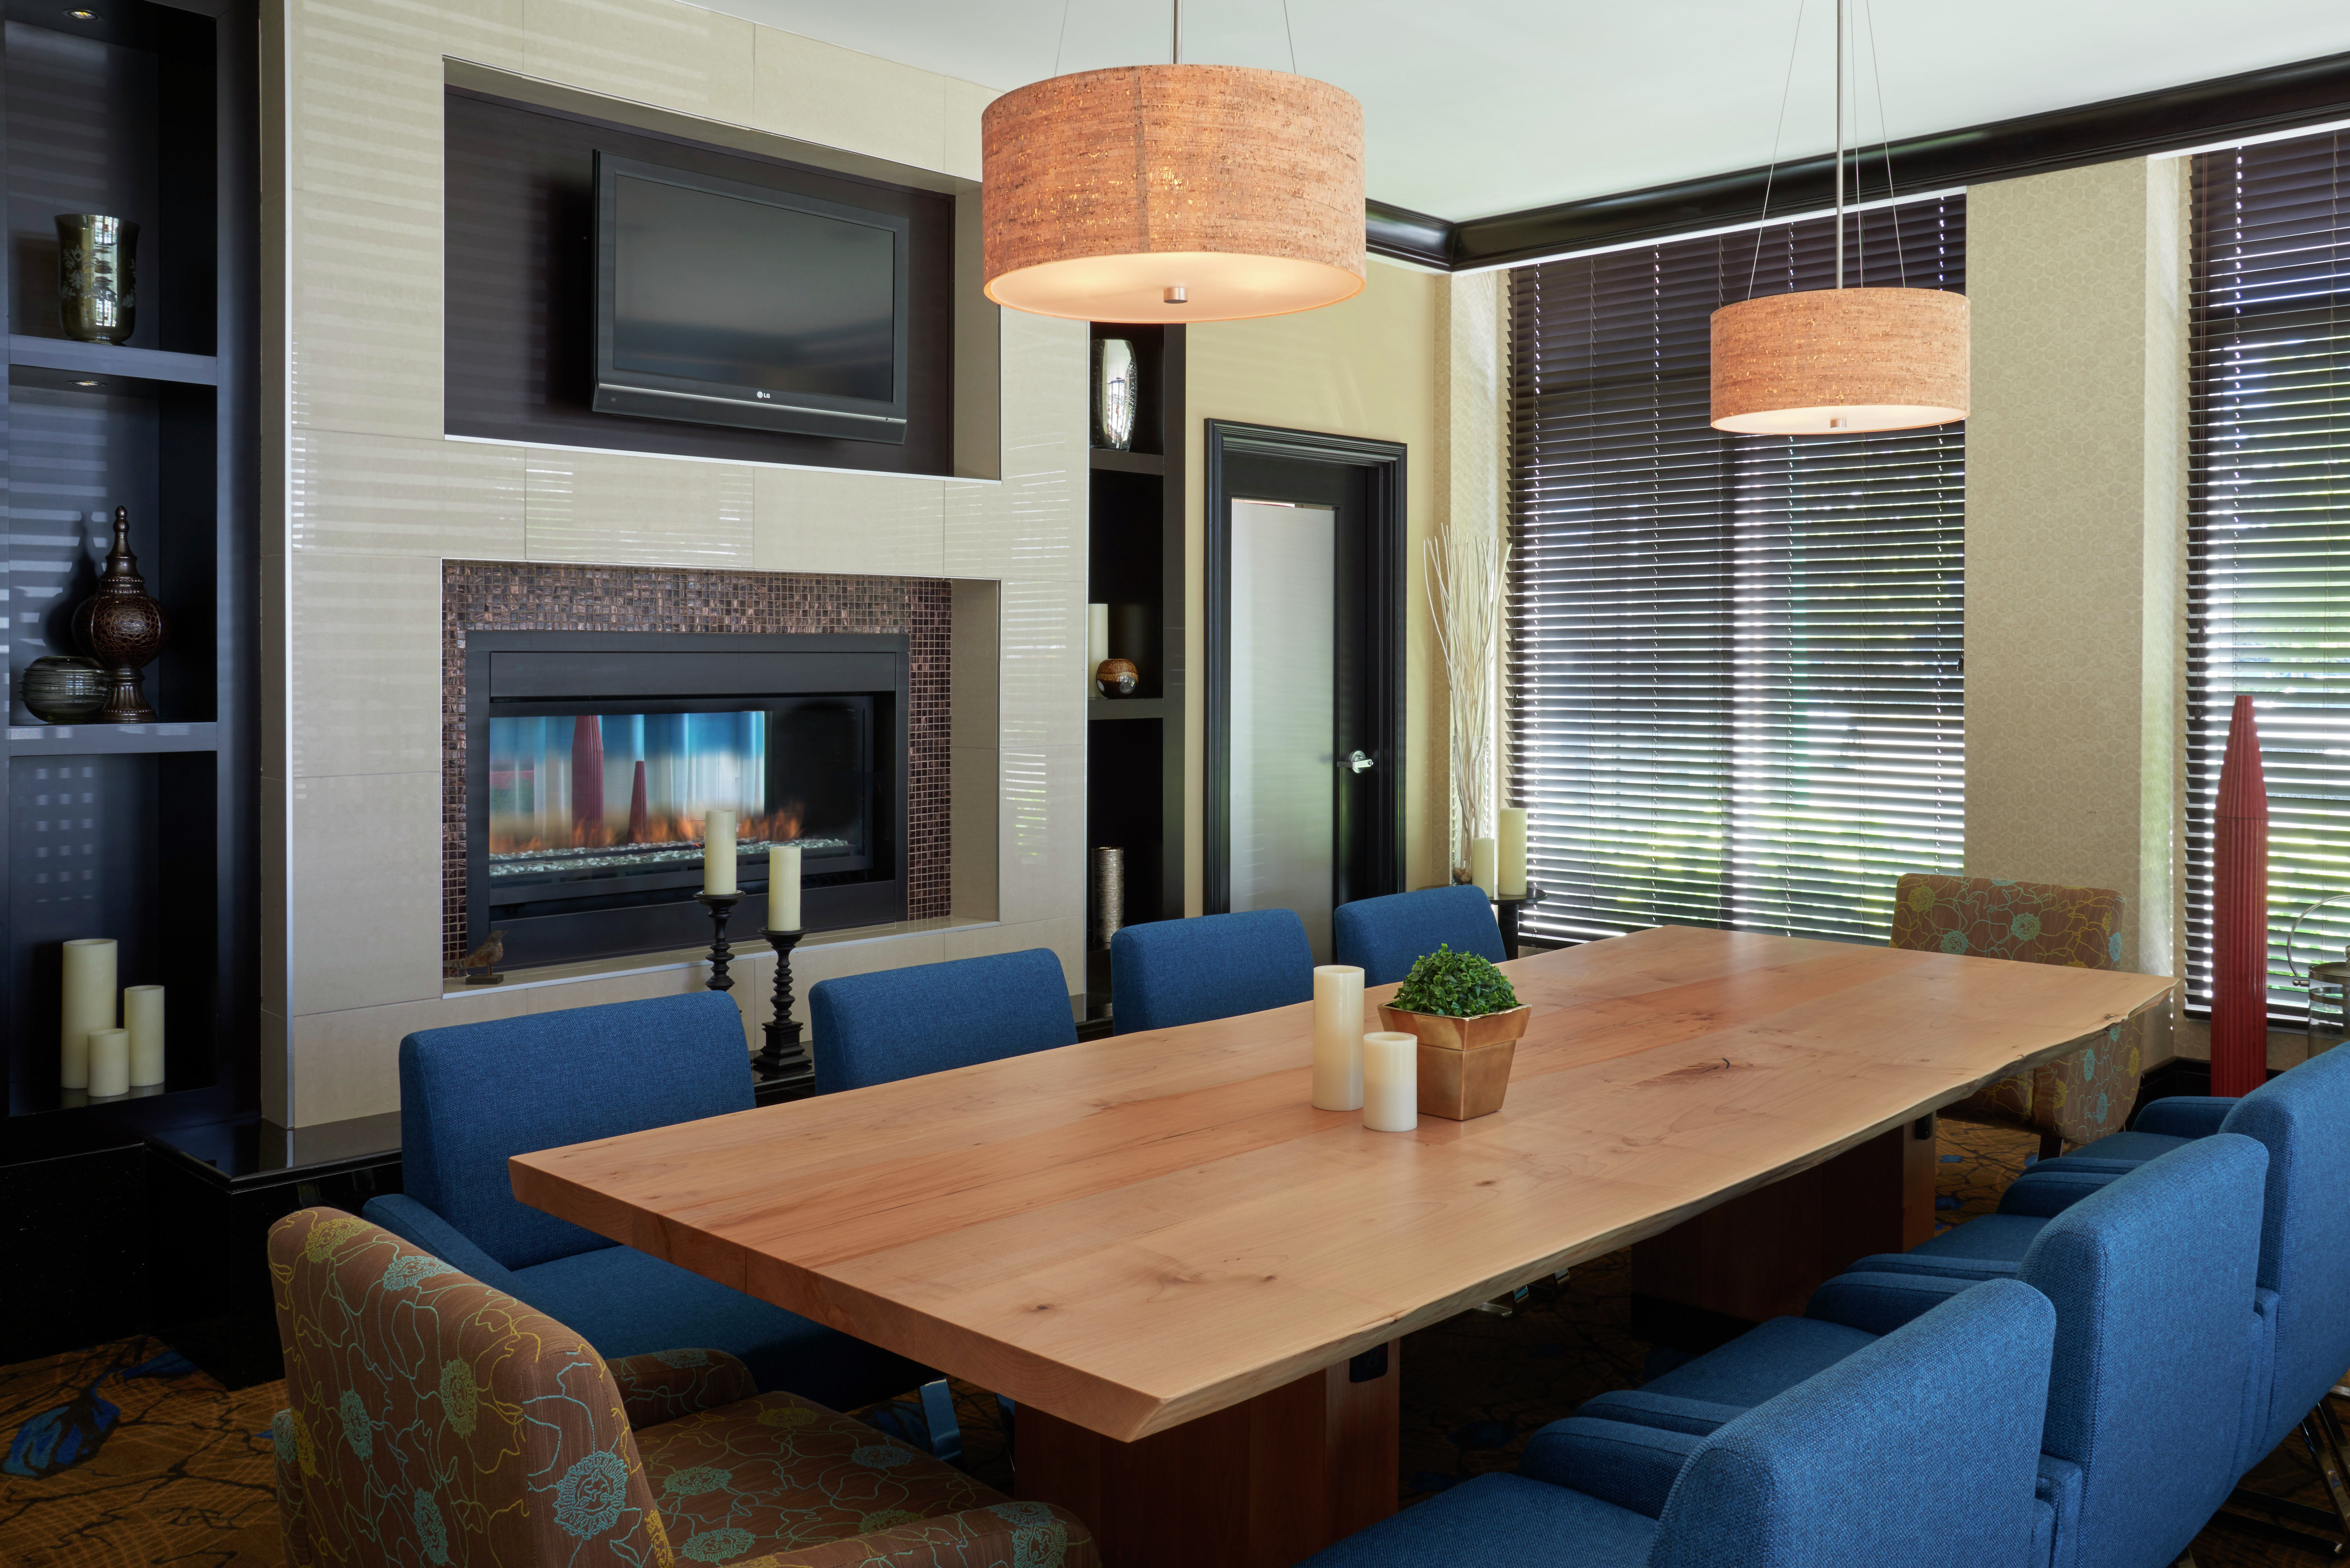 Seating for 10 at Large Wooden Table in Meeting Room With TV, Fireplace, and Large Windows